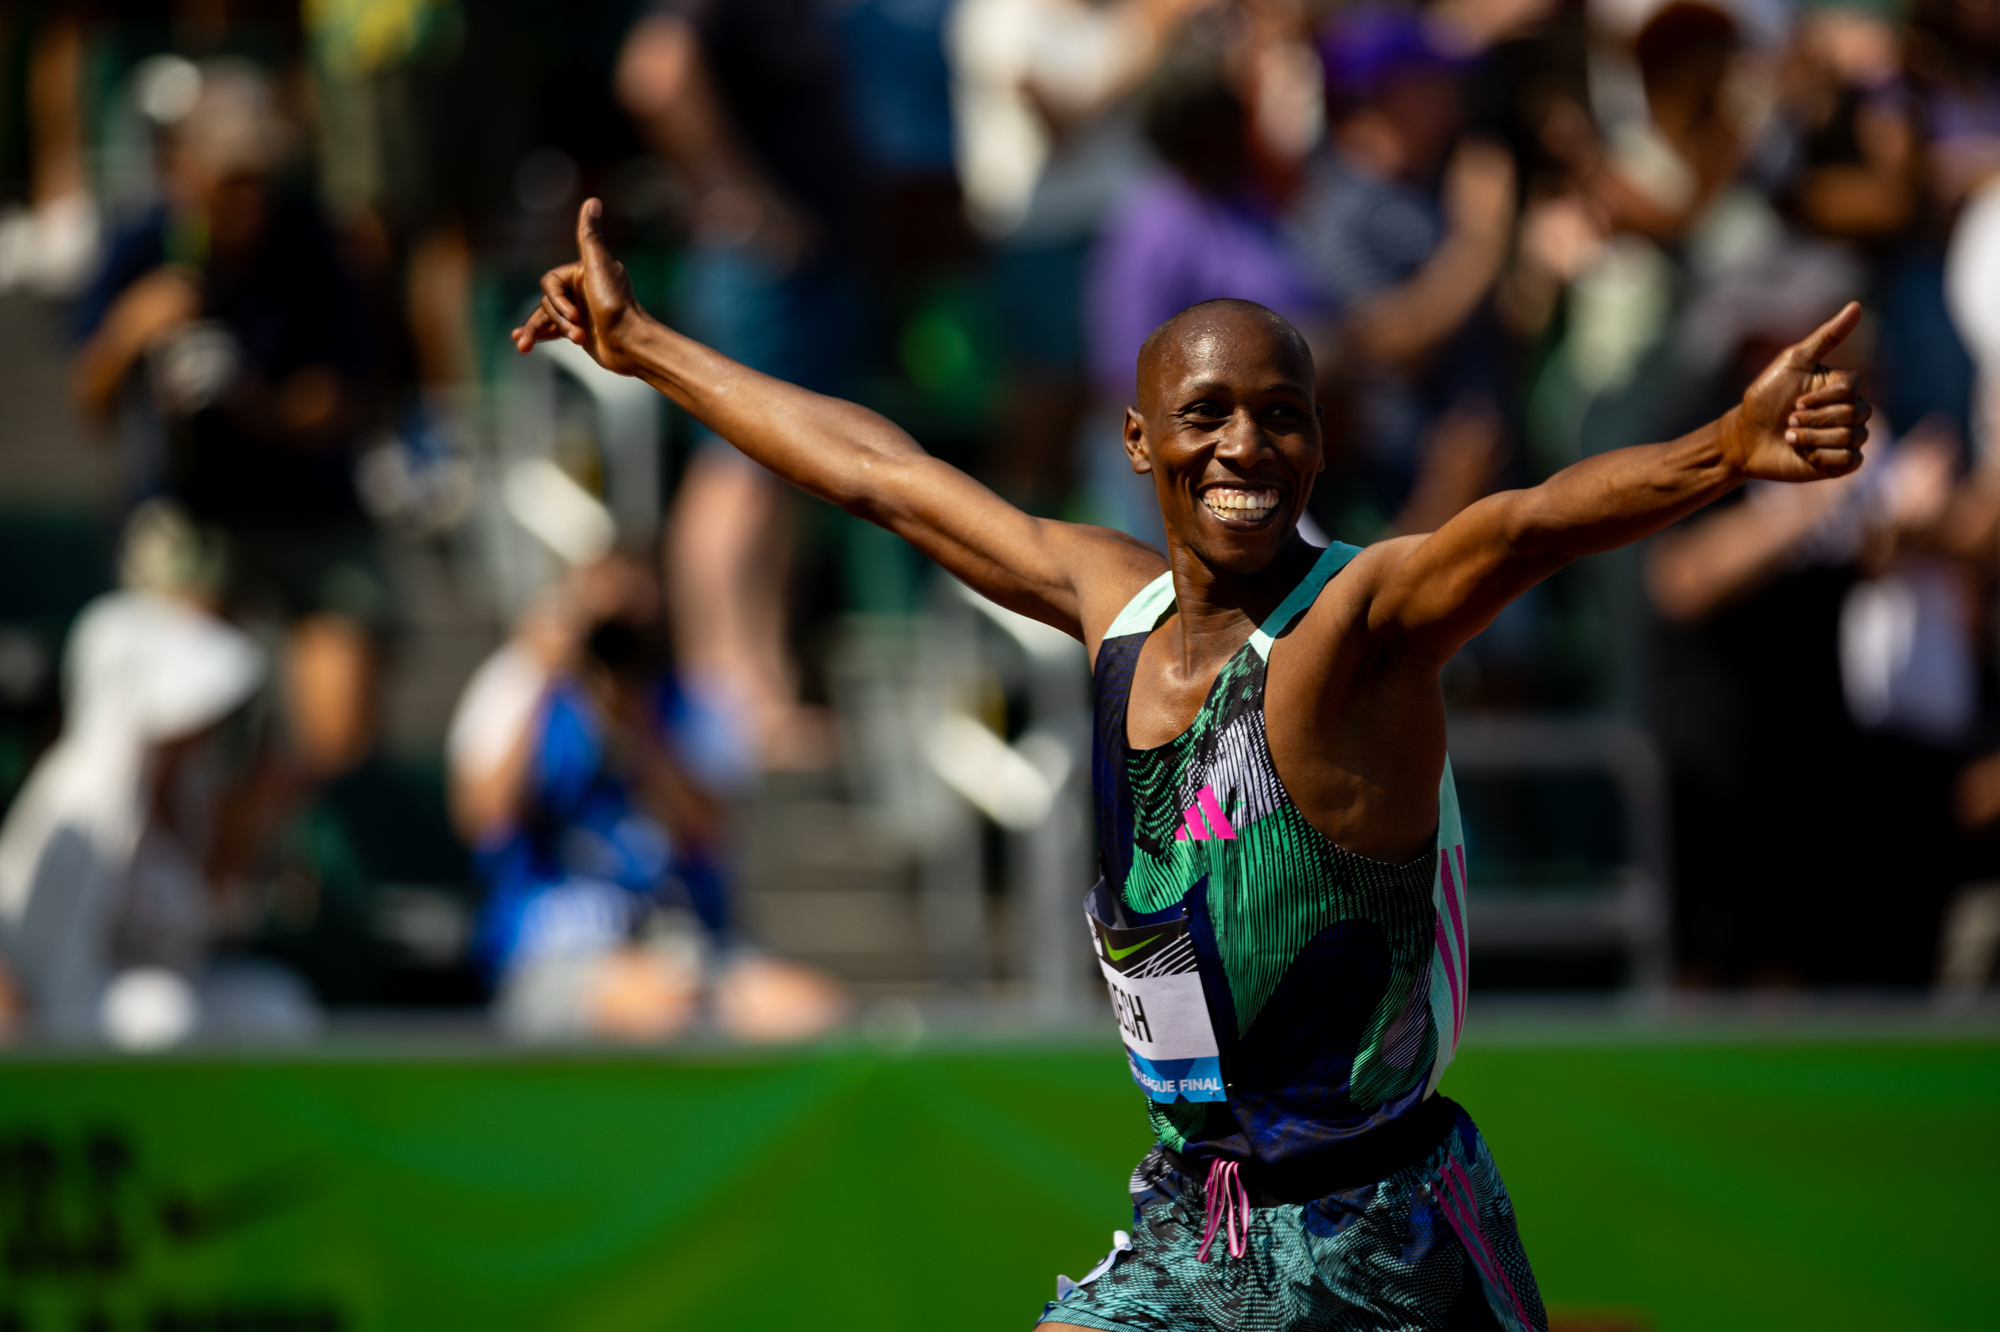 Simon Kiprop Koech of Kenya celebrates as he wins the men's steeplechase at the Prefontaine Classic track and field meet on Saturday, Sept. 16, 2023, at Hayward Field in Eugene.